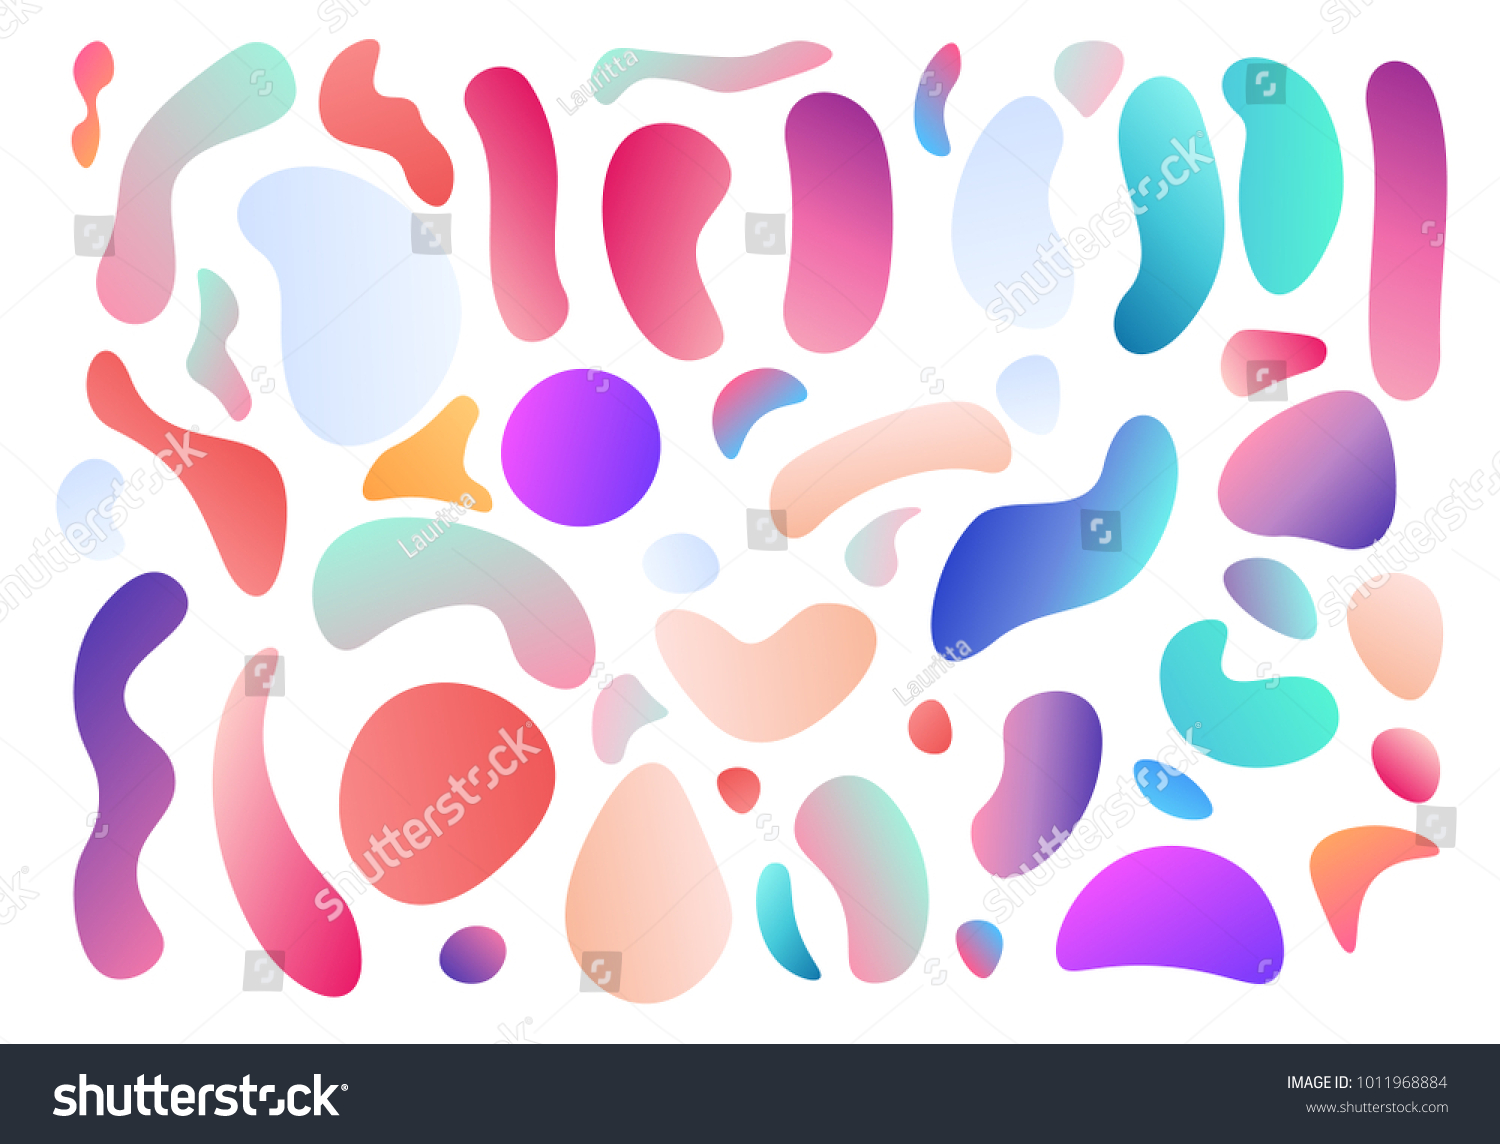 SVG of Set isolated elements of holographic chameleon design palette of shimmering colors. Modern abstract pattern, colorful fluid paint design. Trendy art background. Spot Gradient futuristic shapes svg